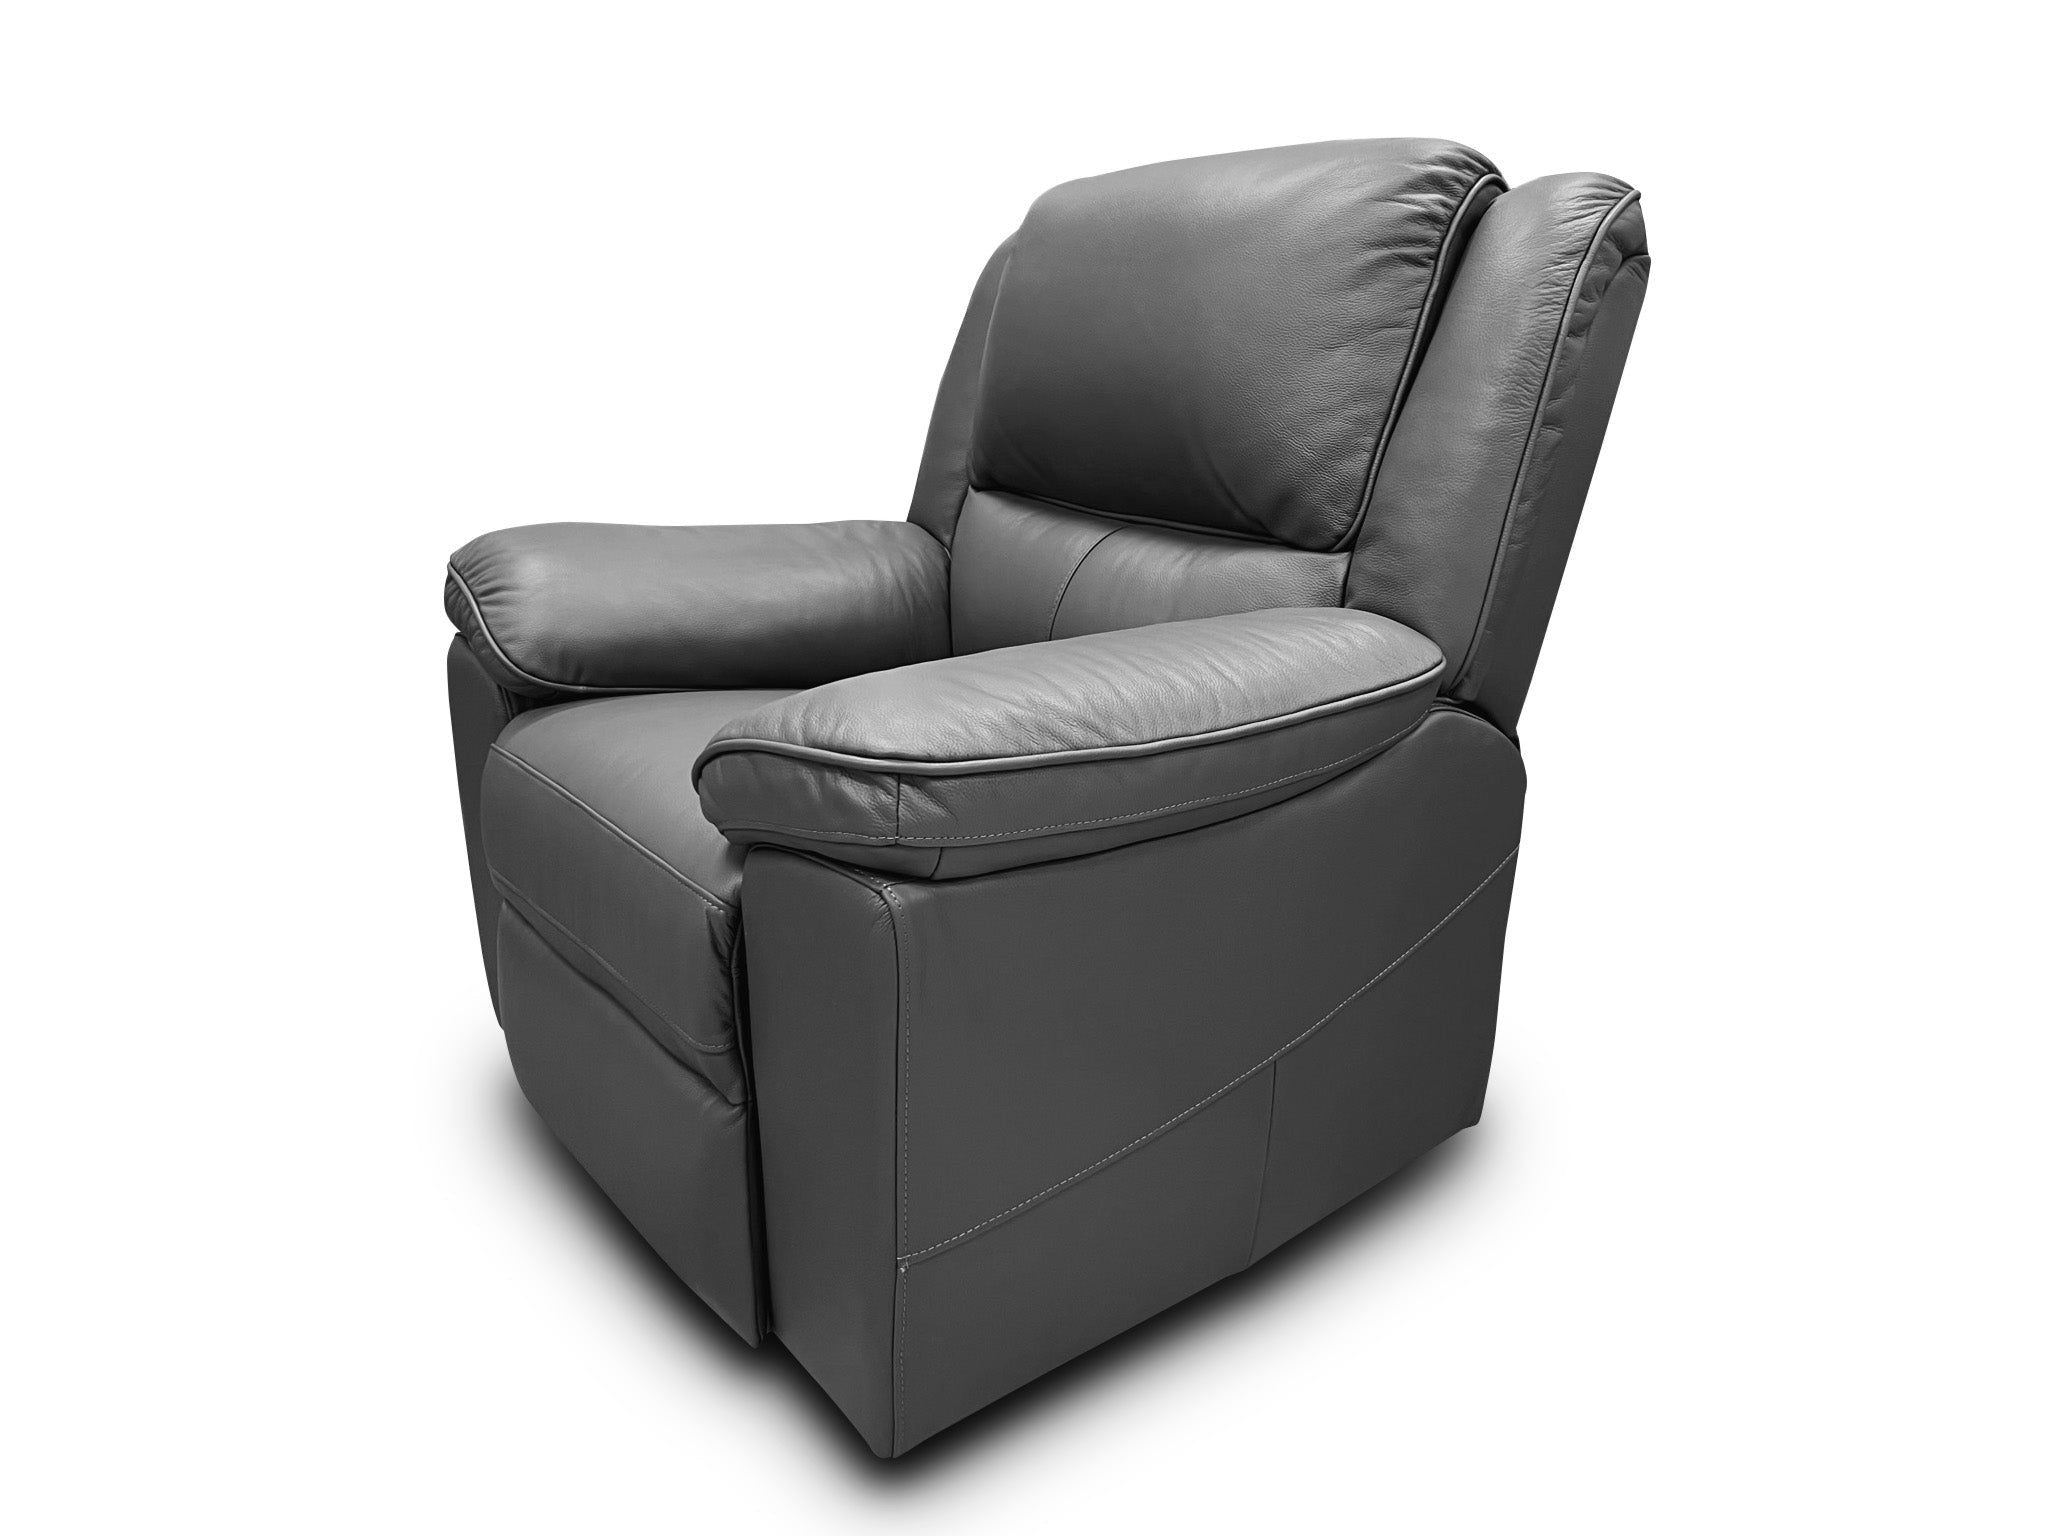 Michigan electric recliner in graphite leather